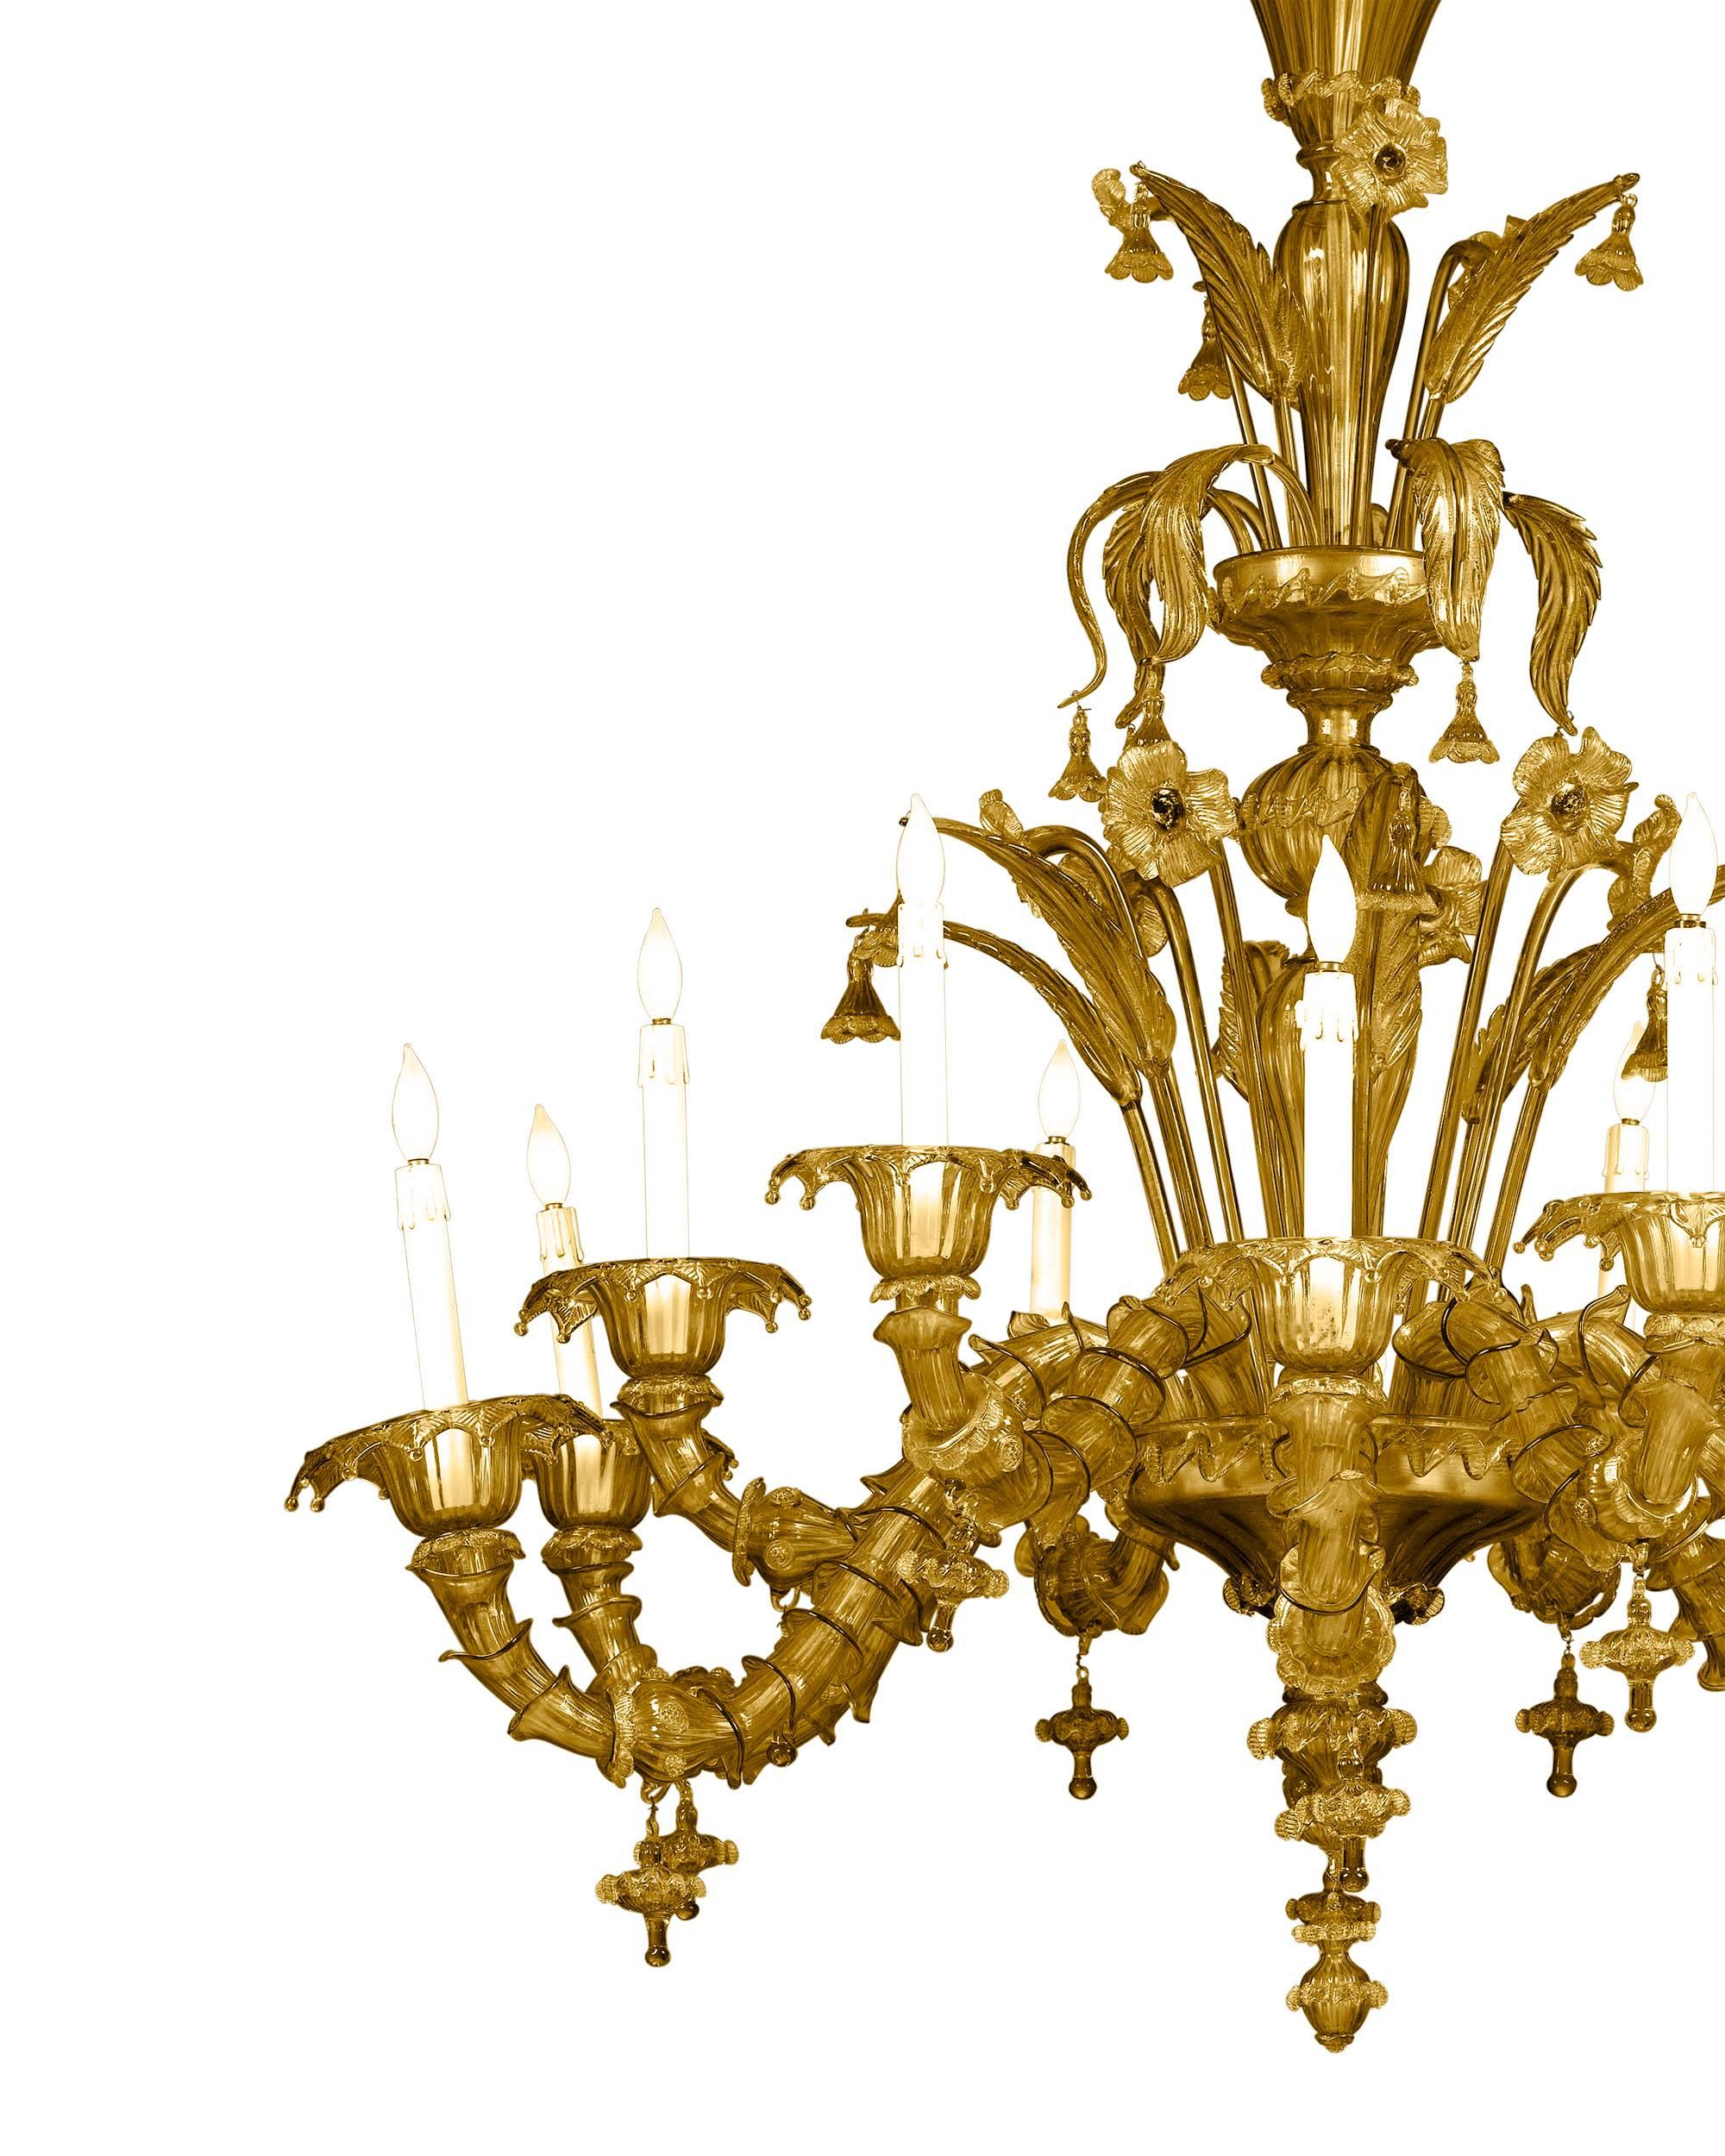 This majestic Murano glass chandelier is one of the finest examples of the exceptional Venetian glassmaking tradition. Composed of twelve lights sumptuously decorated with a garden of delicate flowers, flourishing leaves and a multitude of sculpted